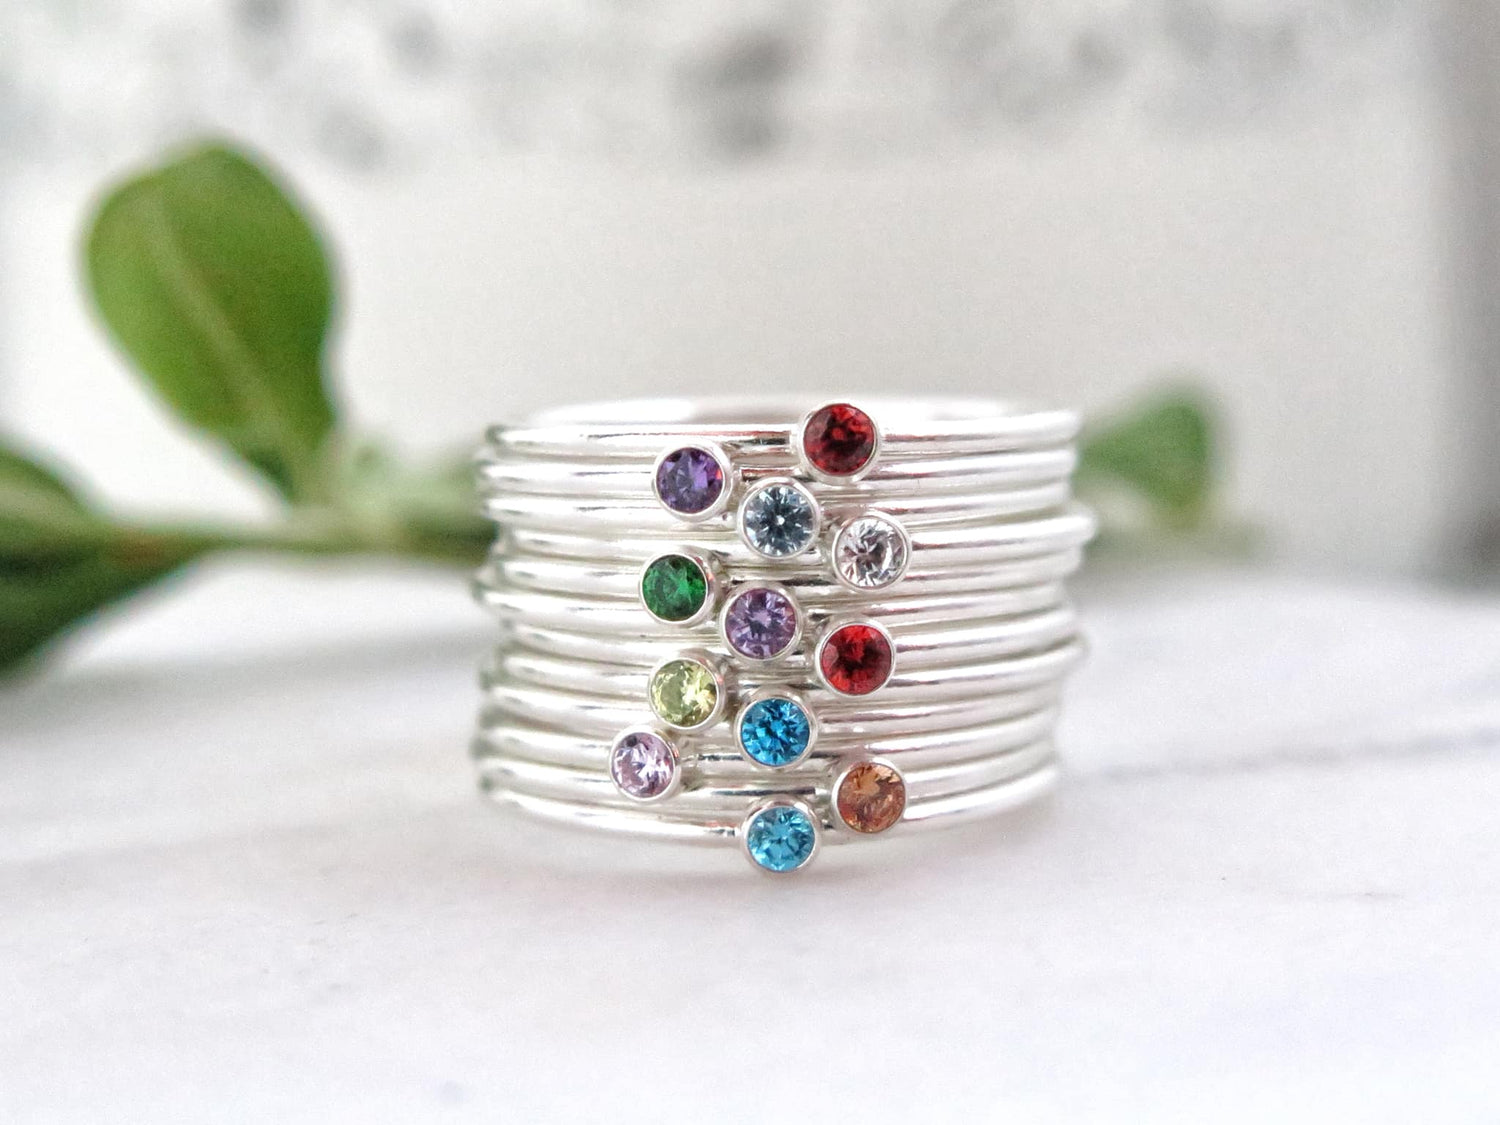 Set of 2 Sterling Silver Name and Birthstone Rings - TickleBugJewelry